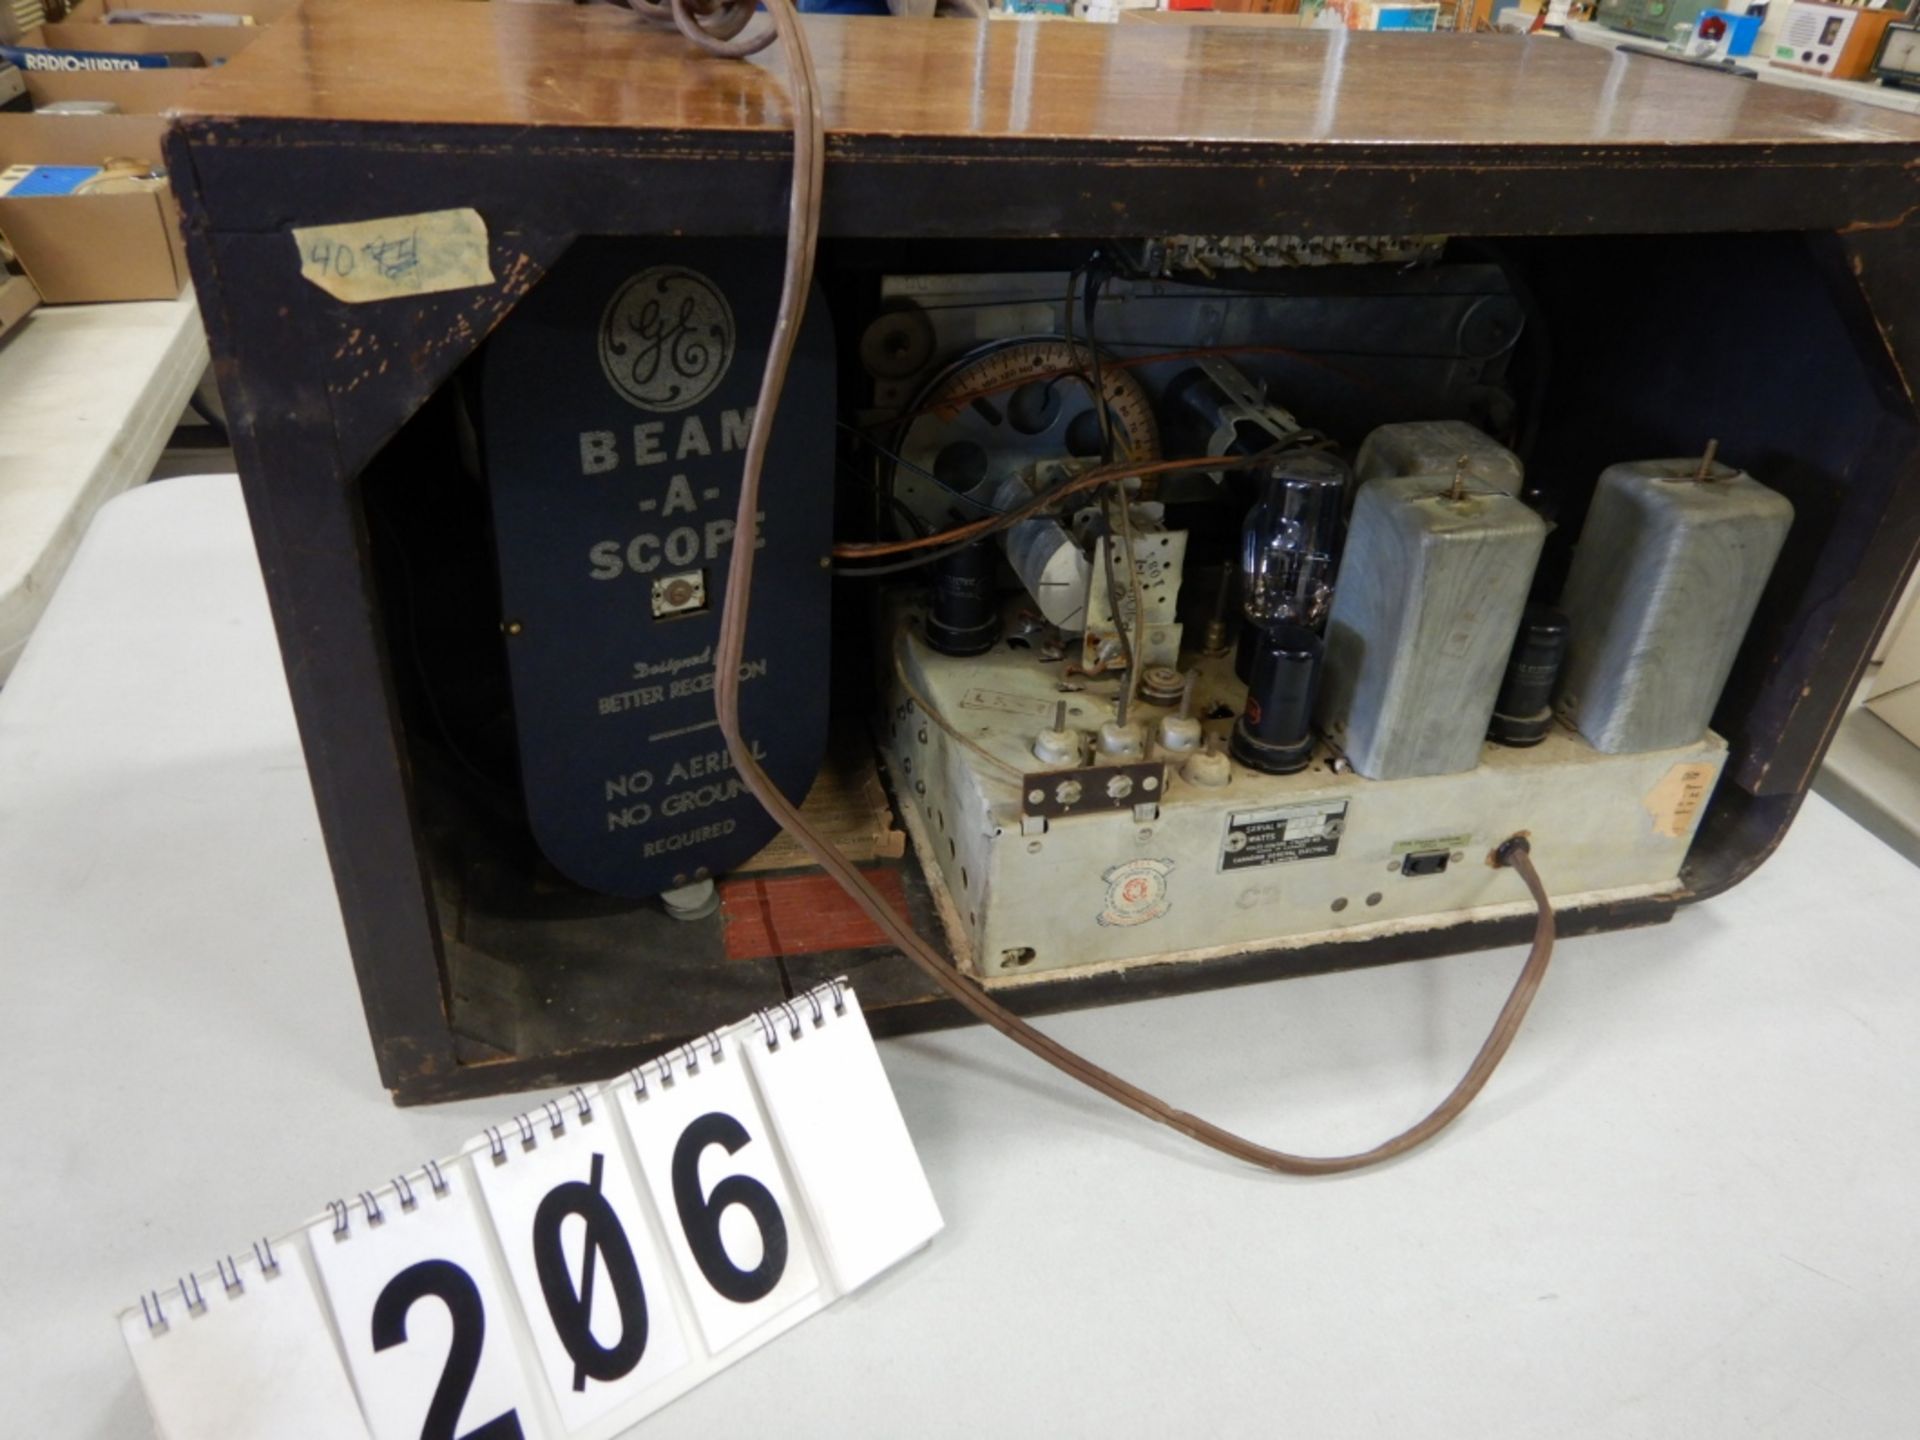 VINTAGE GE 1940'S BEAM-A-SCOPE RADIO NO AIREAL NO GROUND REQUIREDMODEL KL70; SERIAL # 346 WOOD CASE - Image 3 of 3